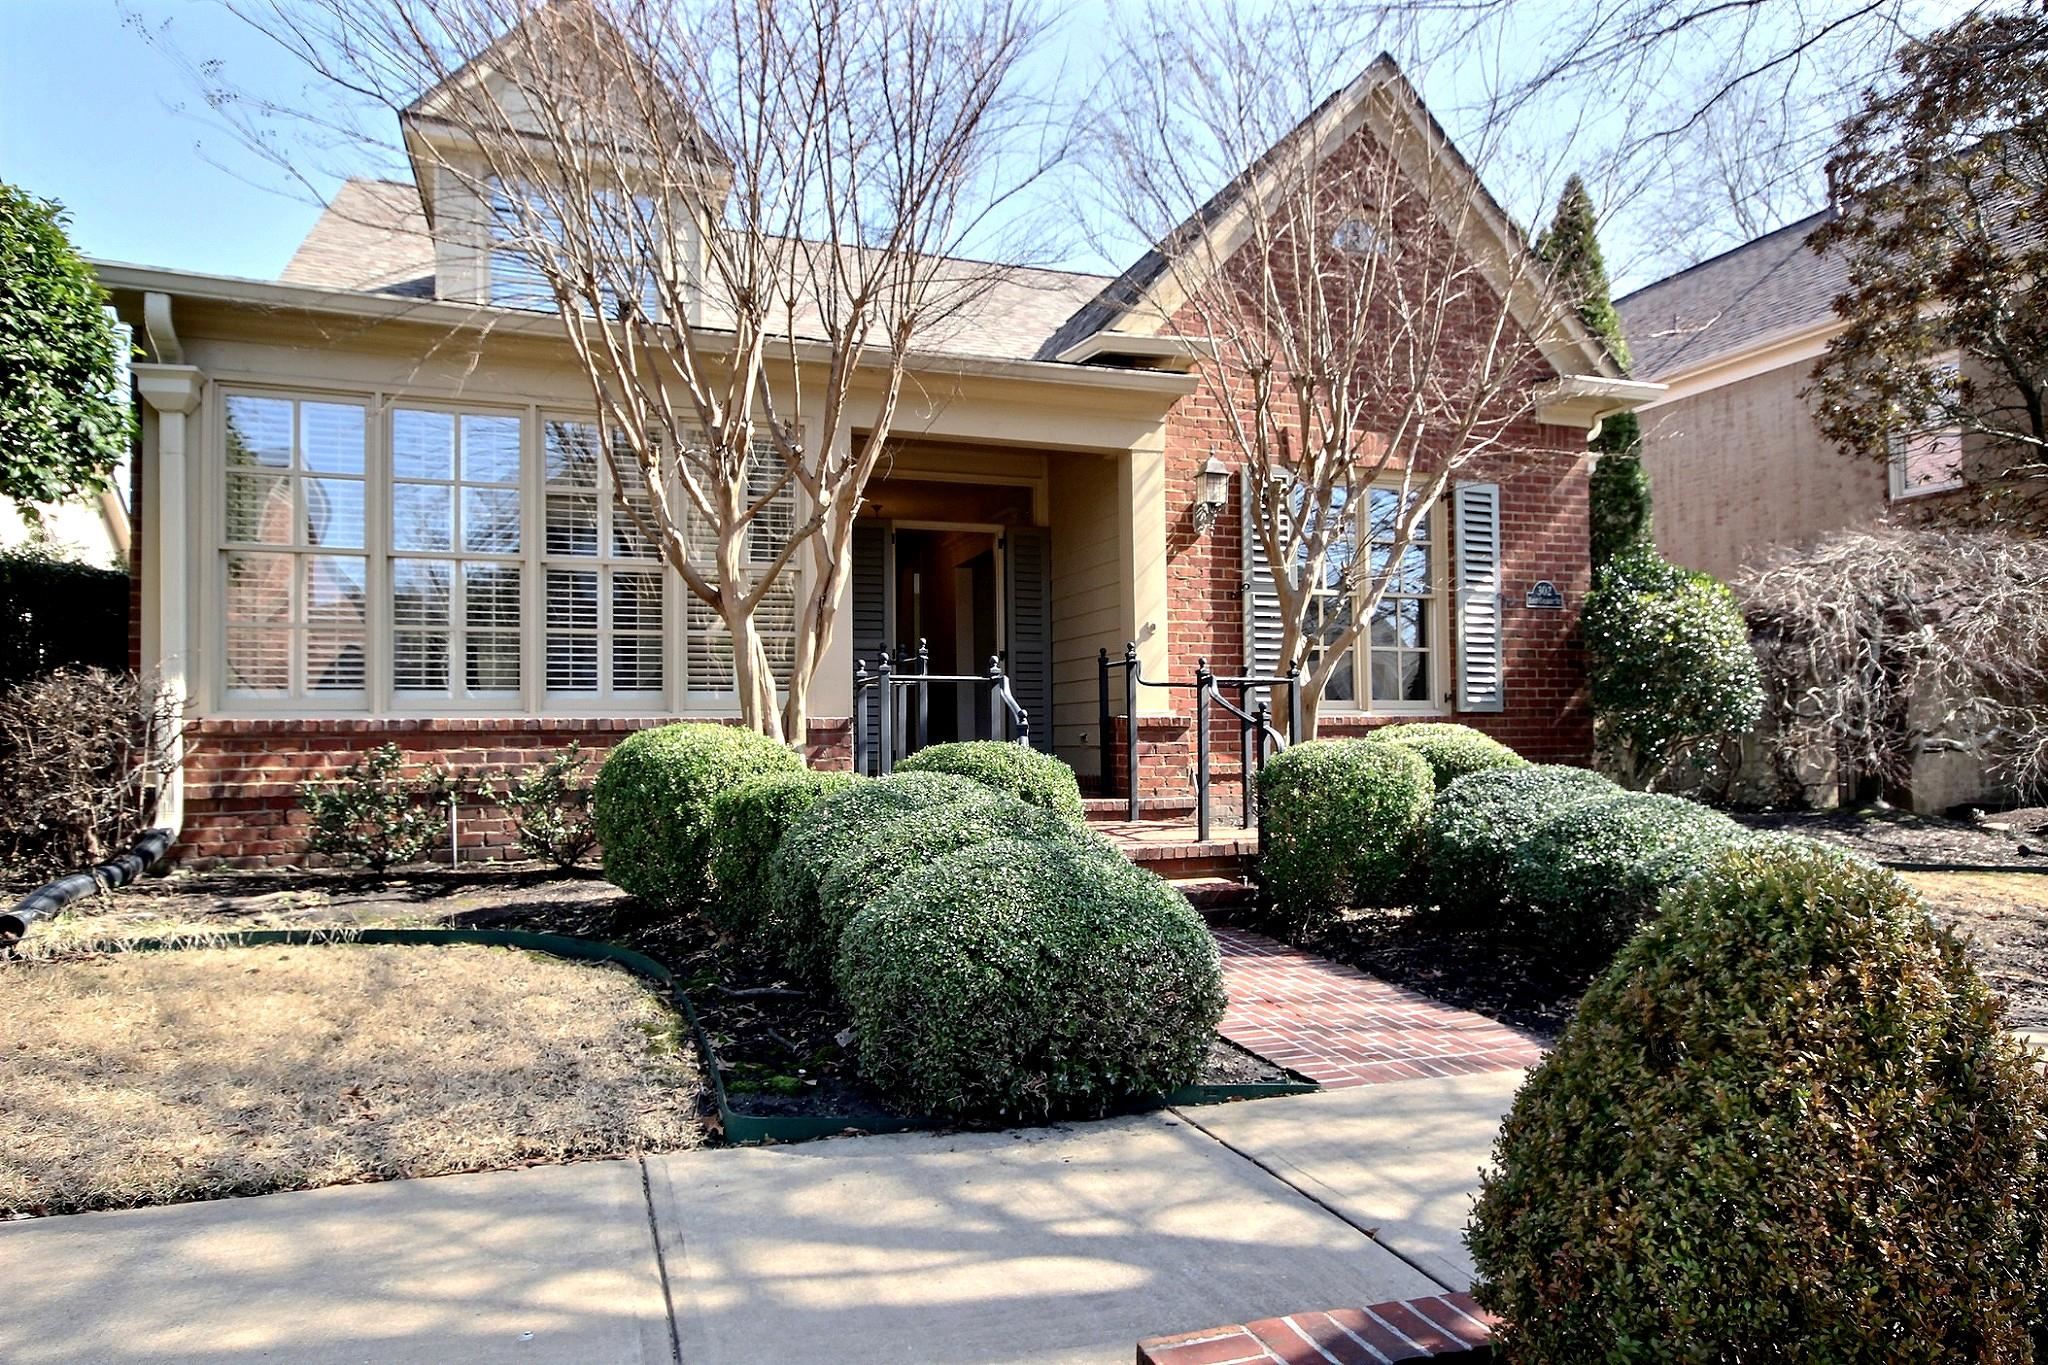 Impressive curb appeal with professional landscaping